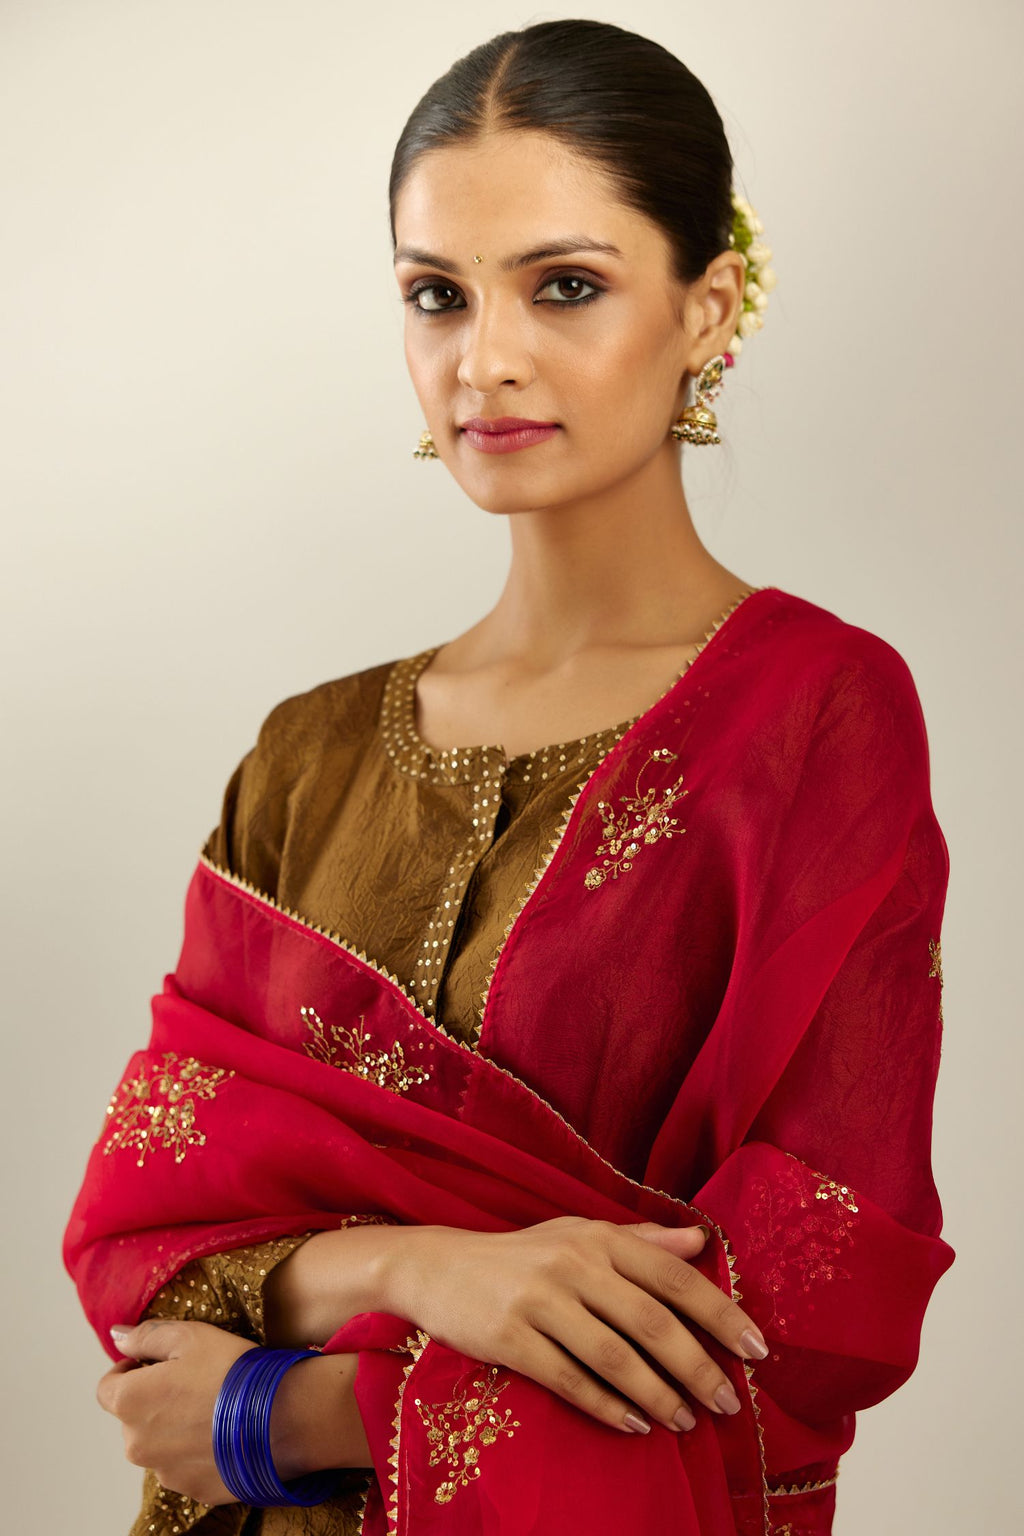 Golden olive silk hand crushed kurta set with concealed button placket neckline, highlighted with gold sequins heavy work at hem.